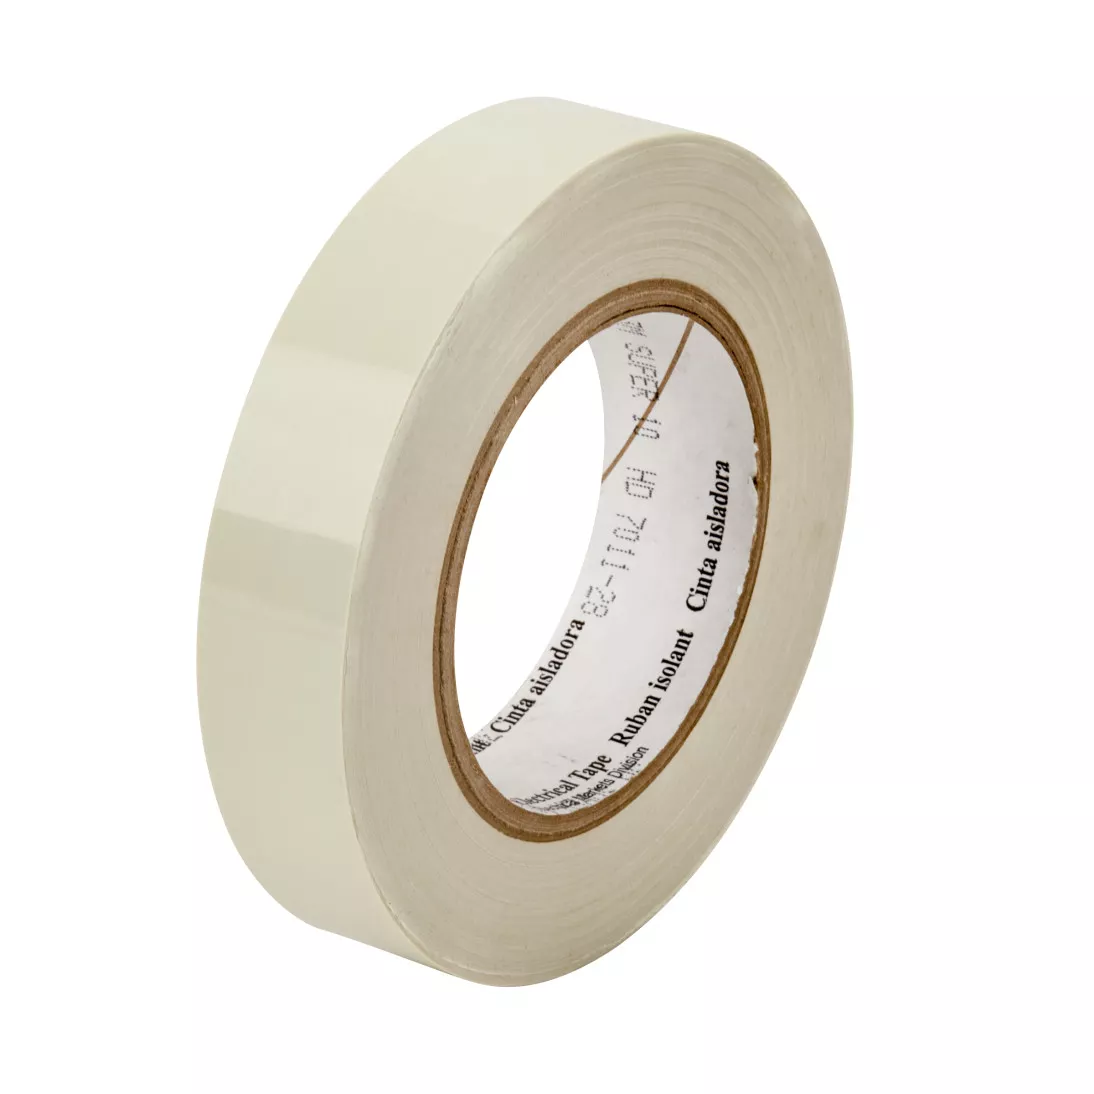 3M™ Epoxy Film Electrical Tape Super 10, 46 1/2 in X 60 yds, on plastic
core, Log roll, 1 Roll/Case